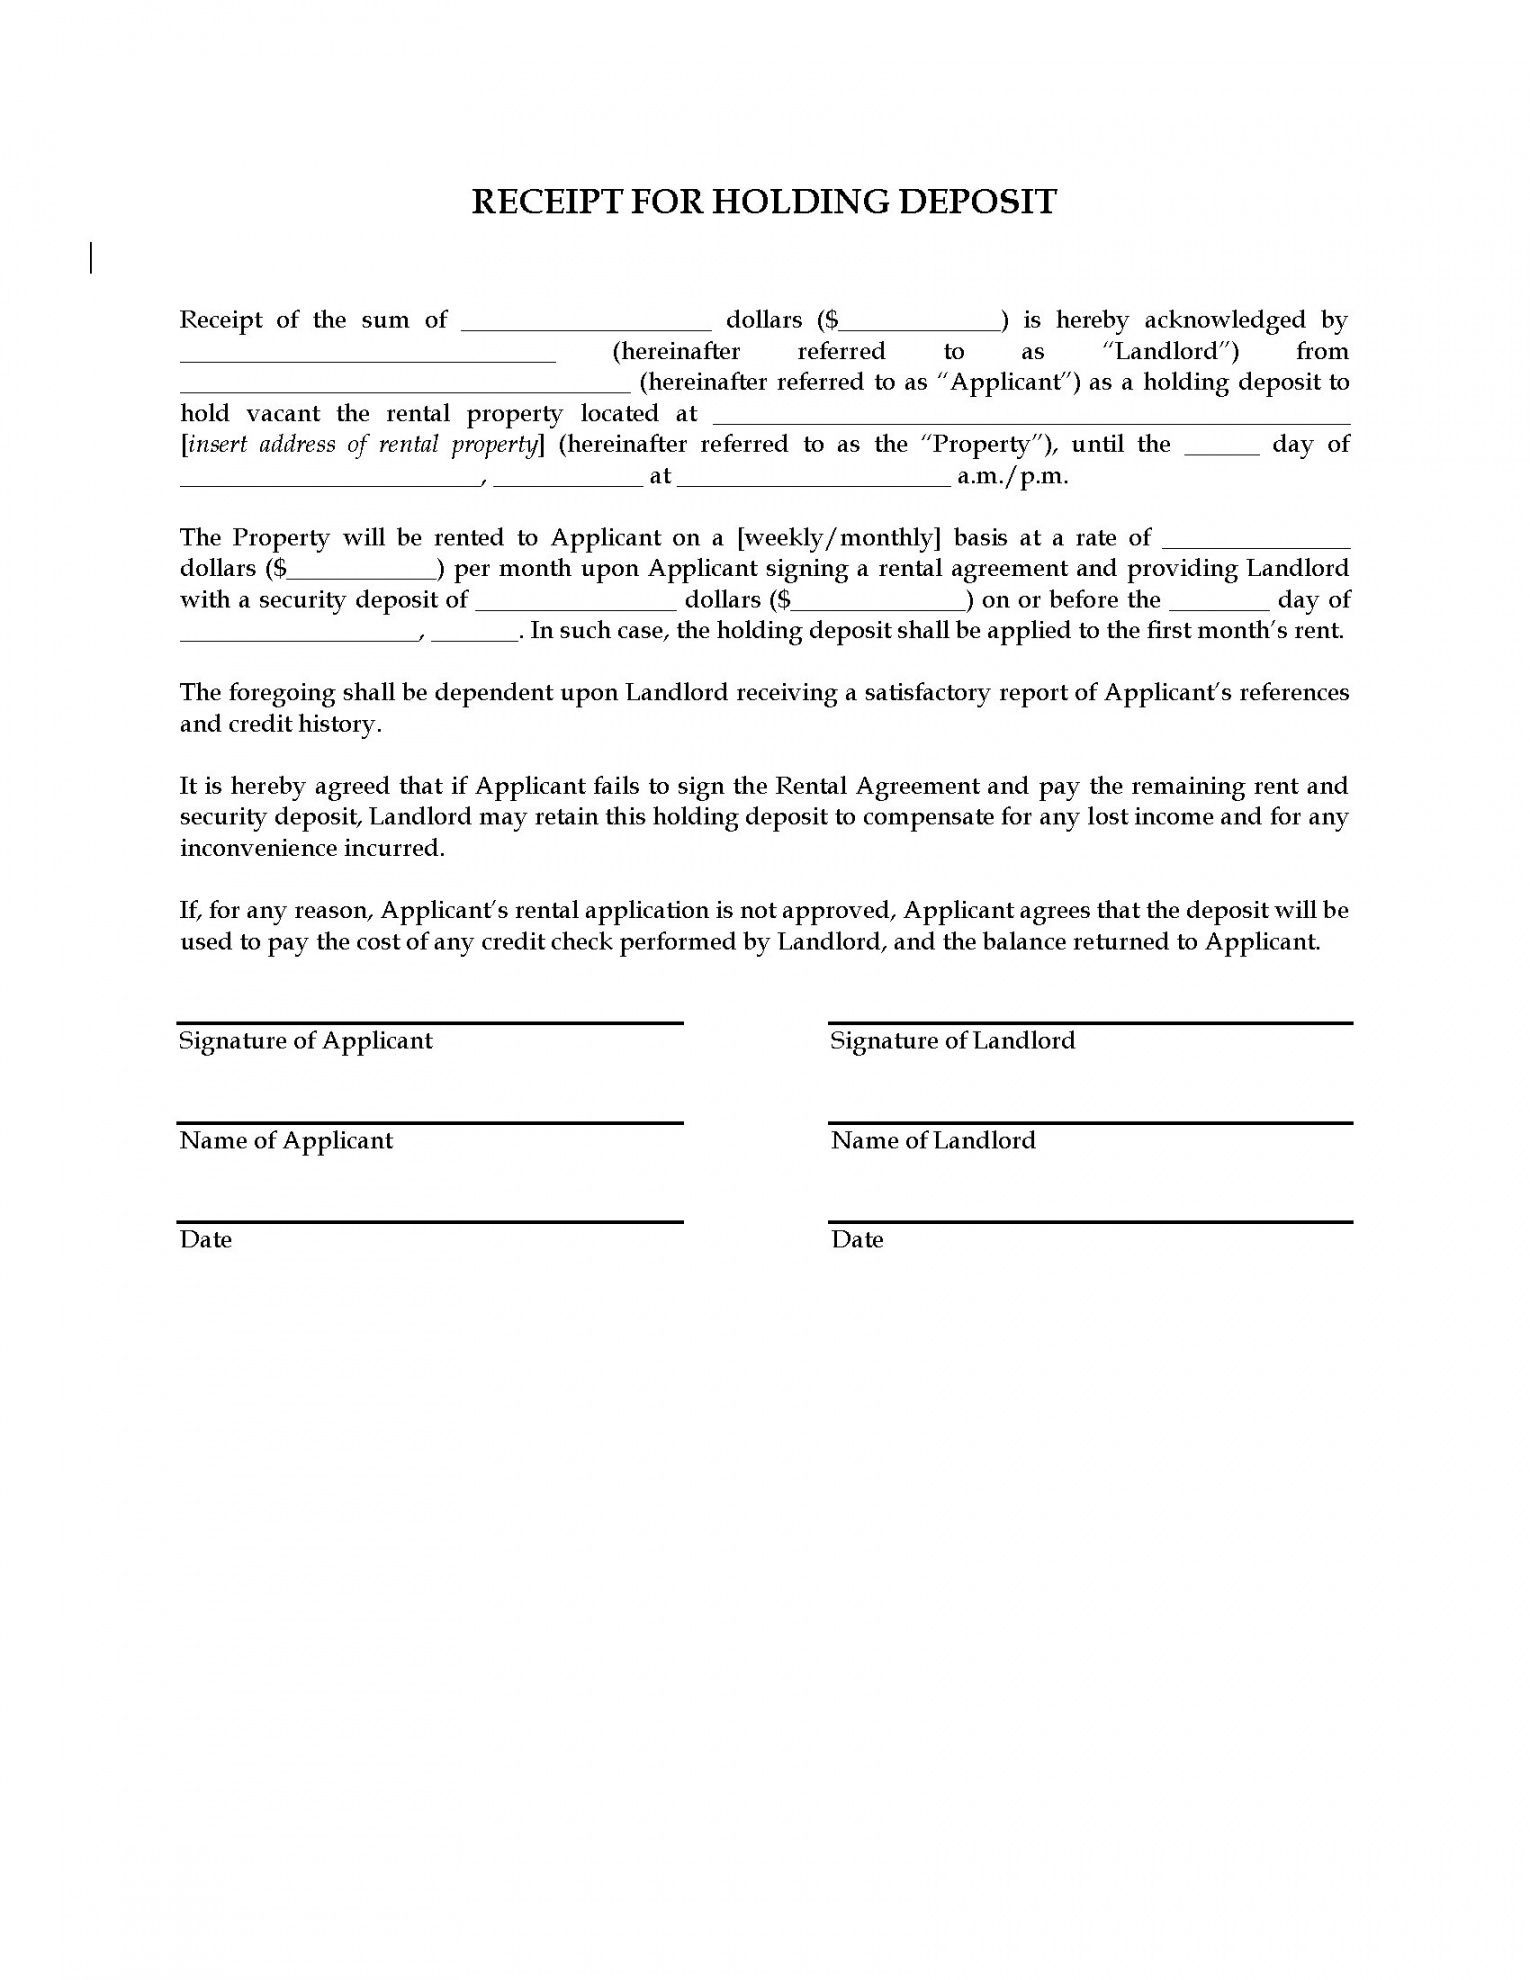 Deposit Agreement Template - Holding Deposit Agreement Form Fill  For Non Refundable Rental Deposit Form Template In Non Refundable Rental Deposit Form Template